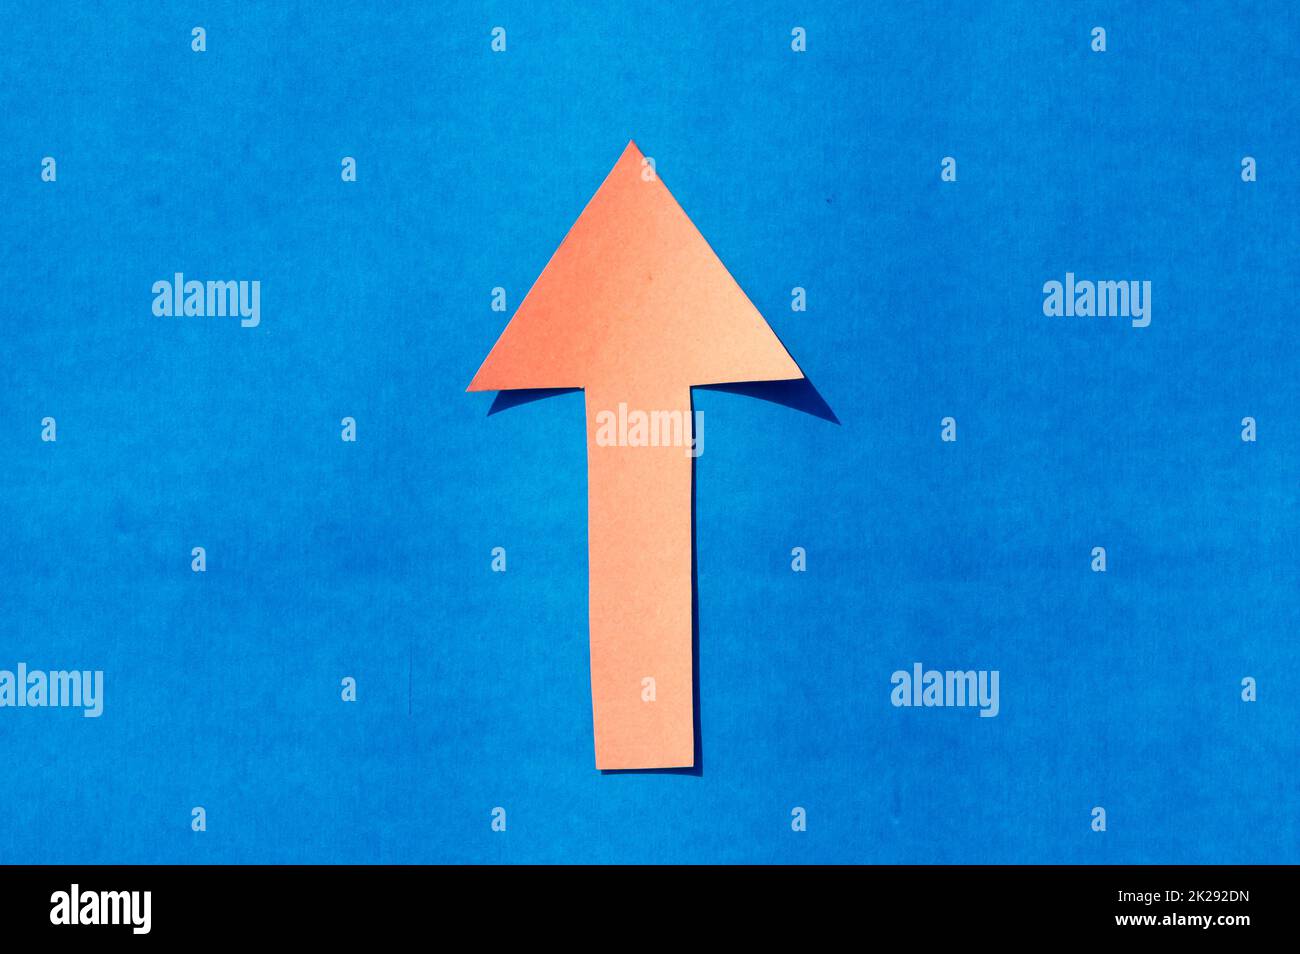 A up facing arrow symbol indicating upward direction. Isolated on blue background. Useful for signage and for way finding and surface markings. Stock Photo